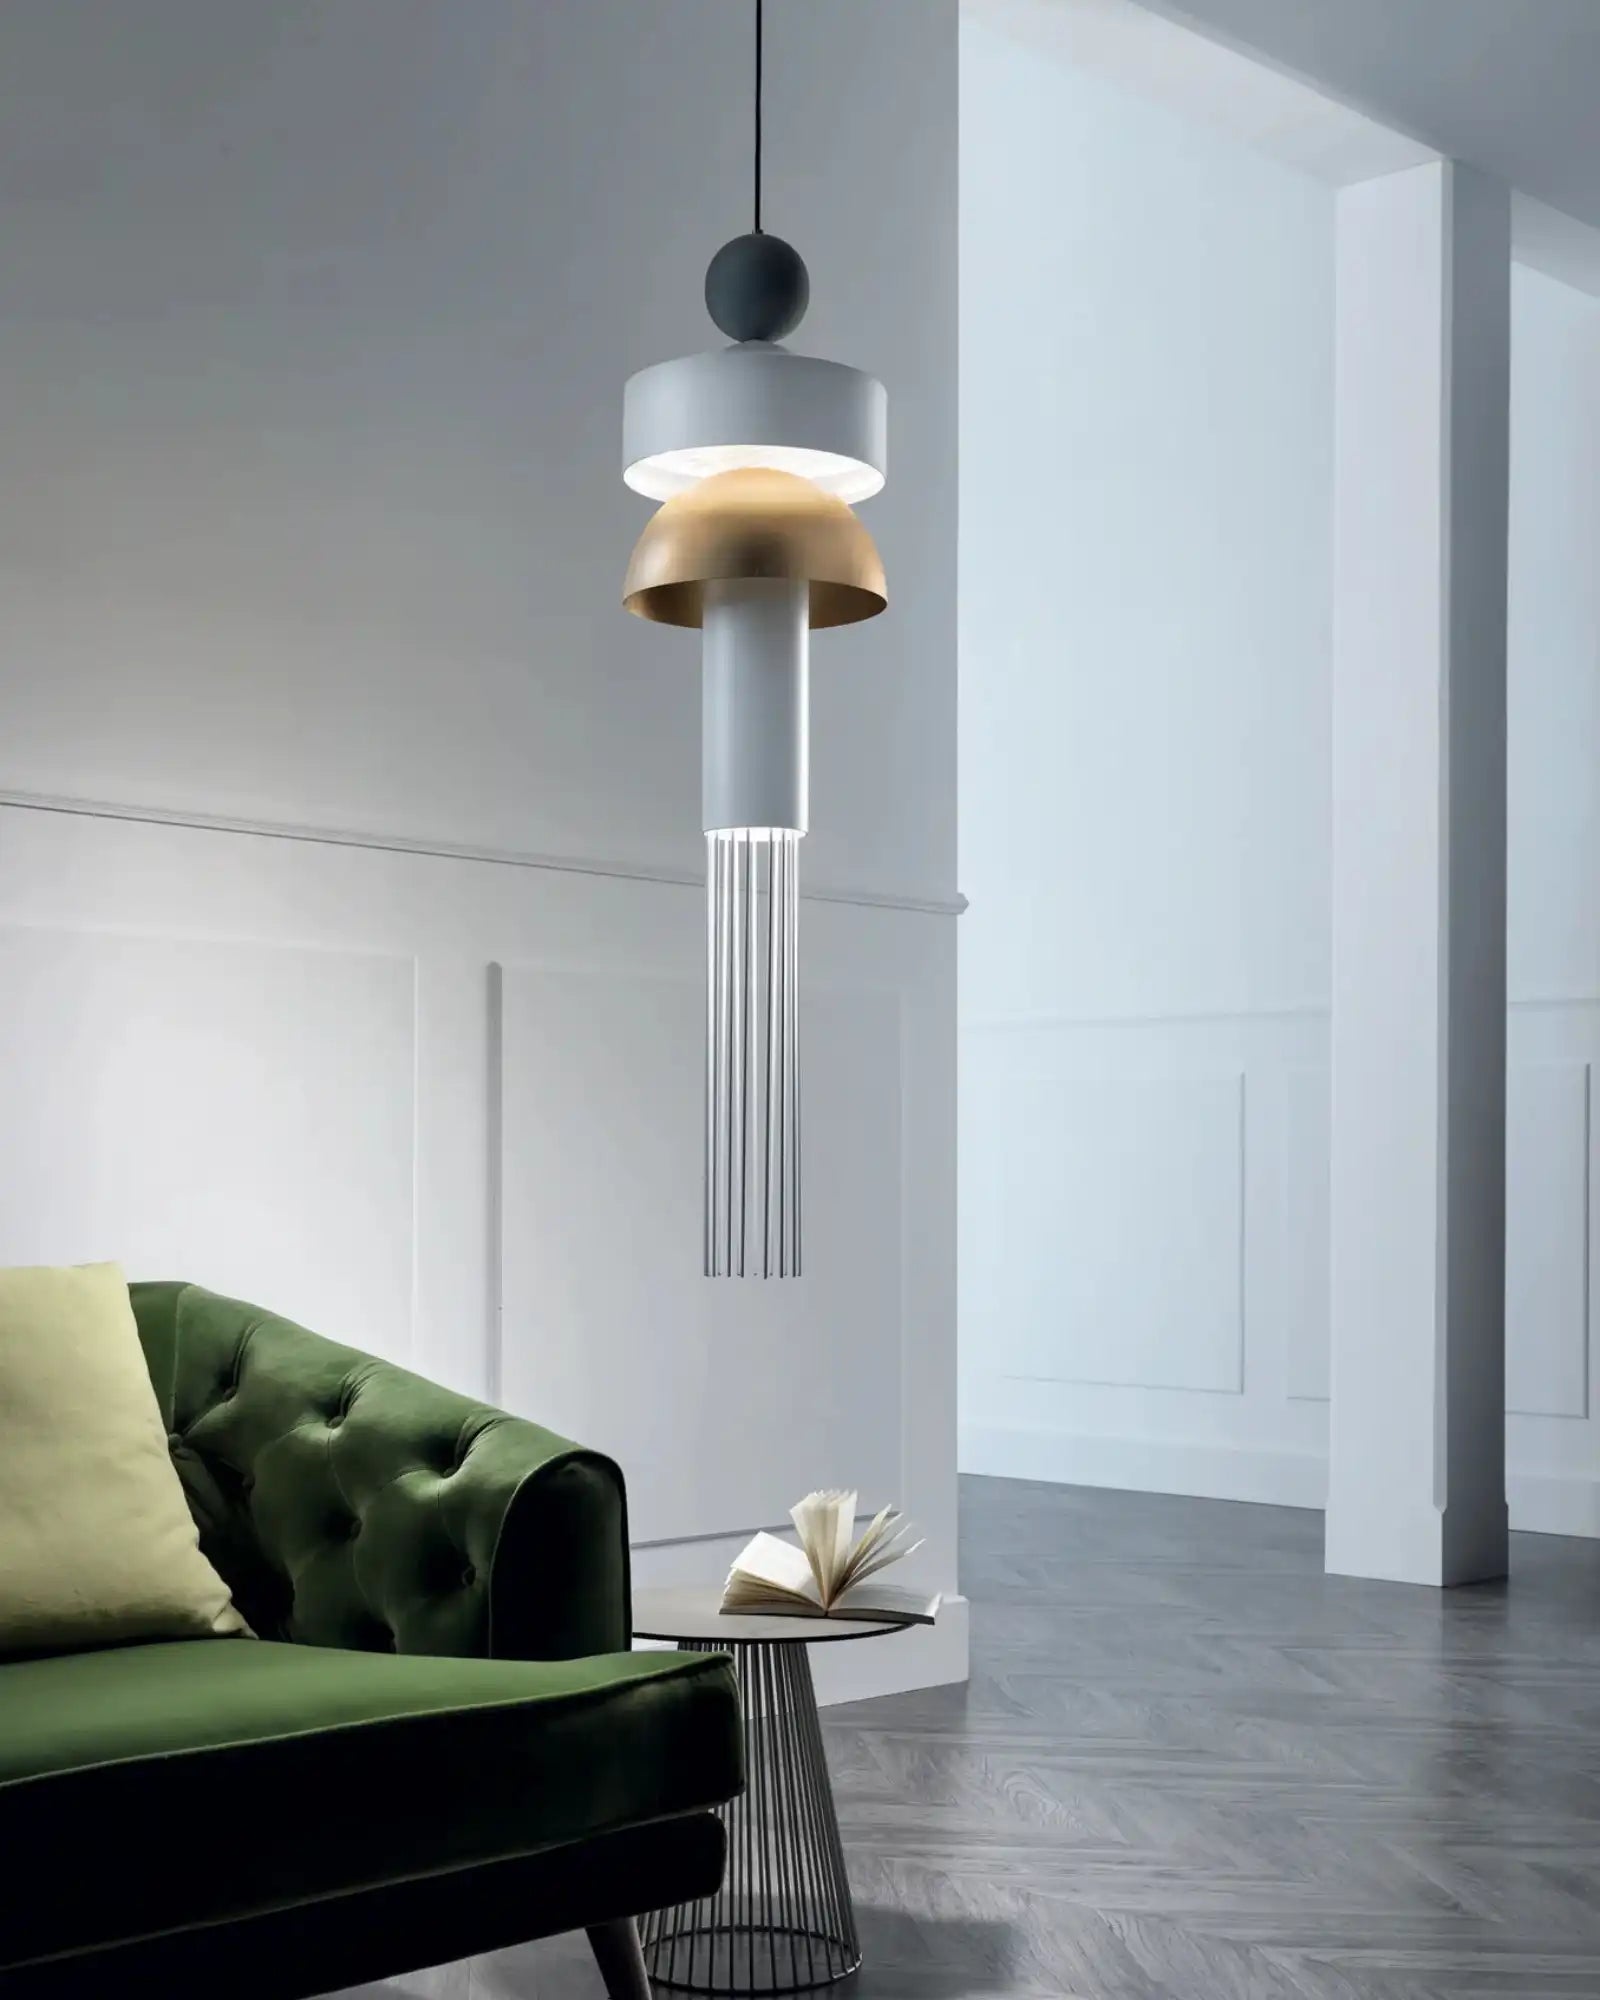 Nappe XL Pendant Light by Masiero Lighting featured within a contemporary living room | Nook Collections